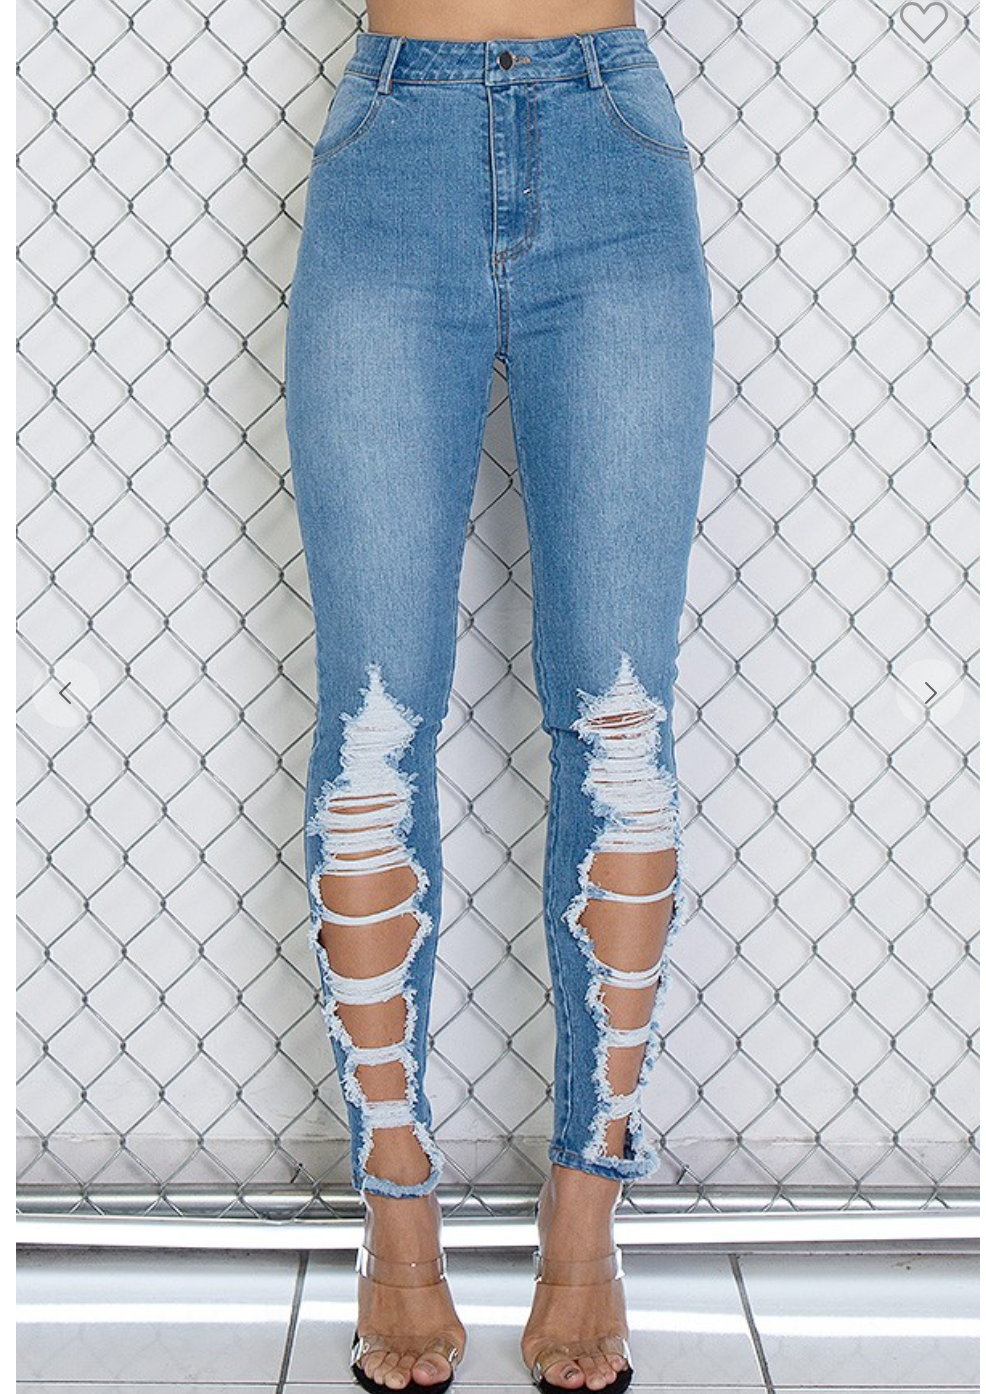 Down & Distressed Jeans